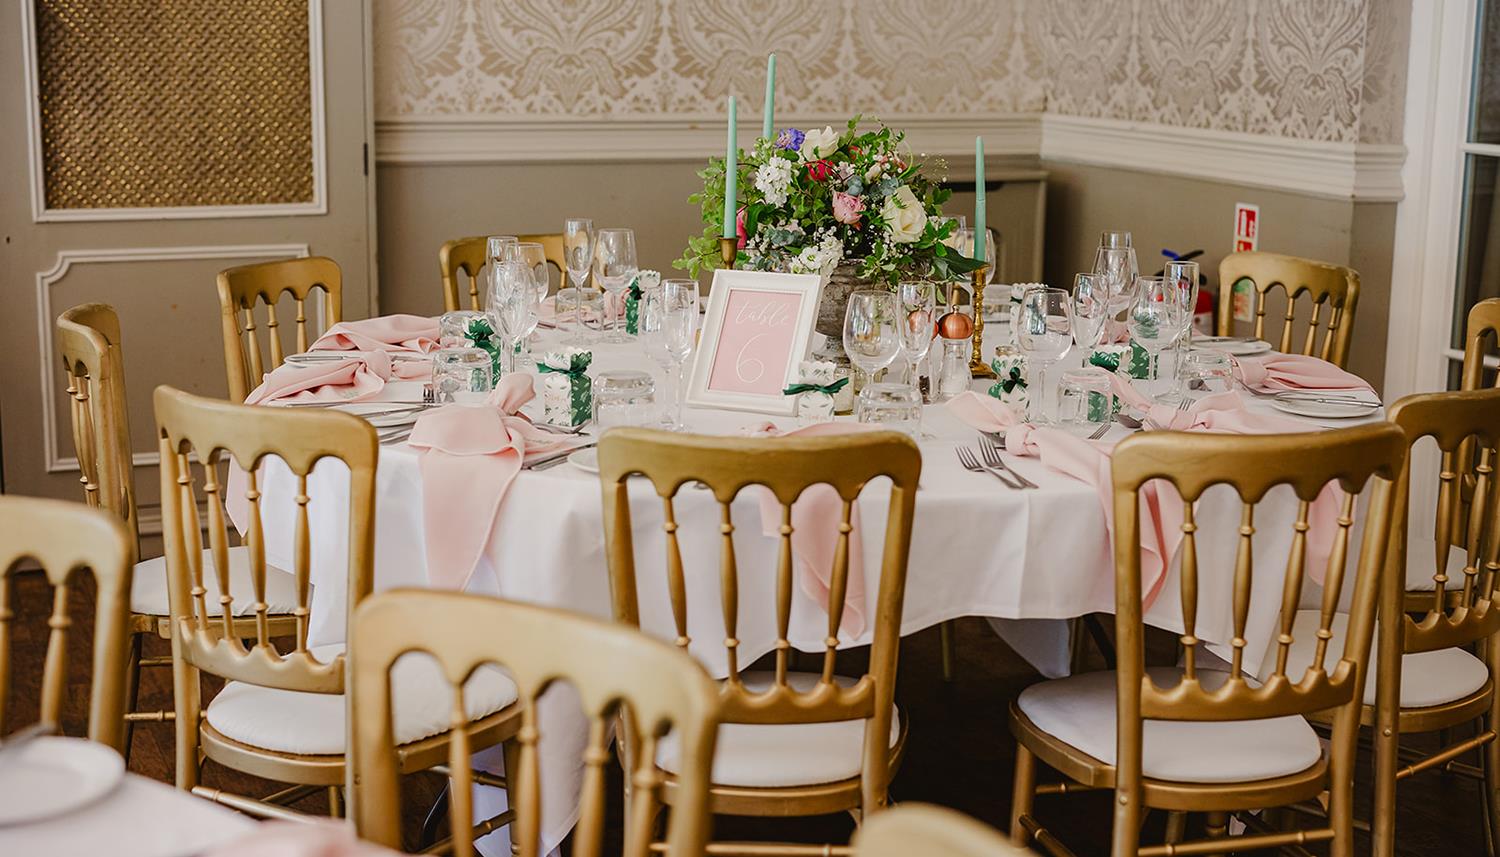 Decorated table. Photo Credit: Philip Quinnell Photography